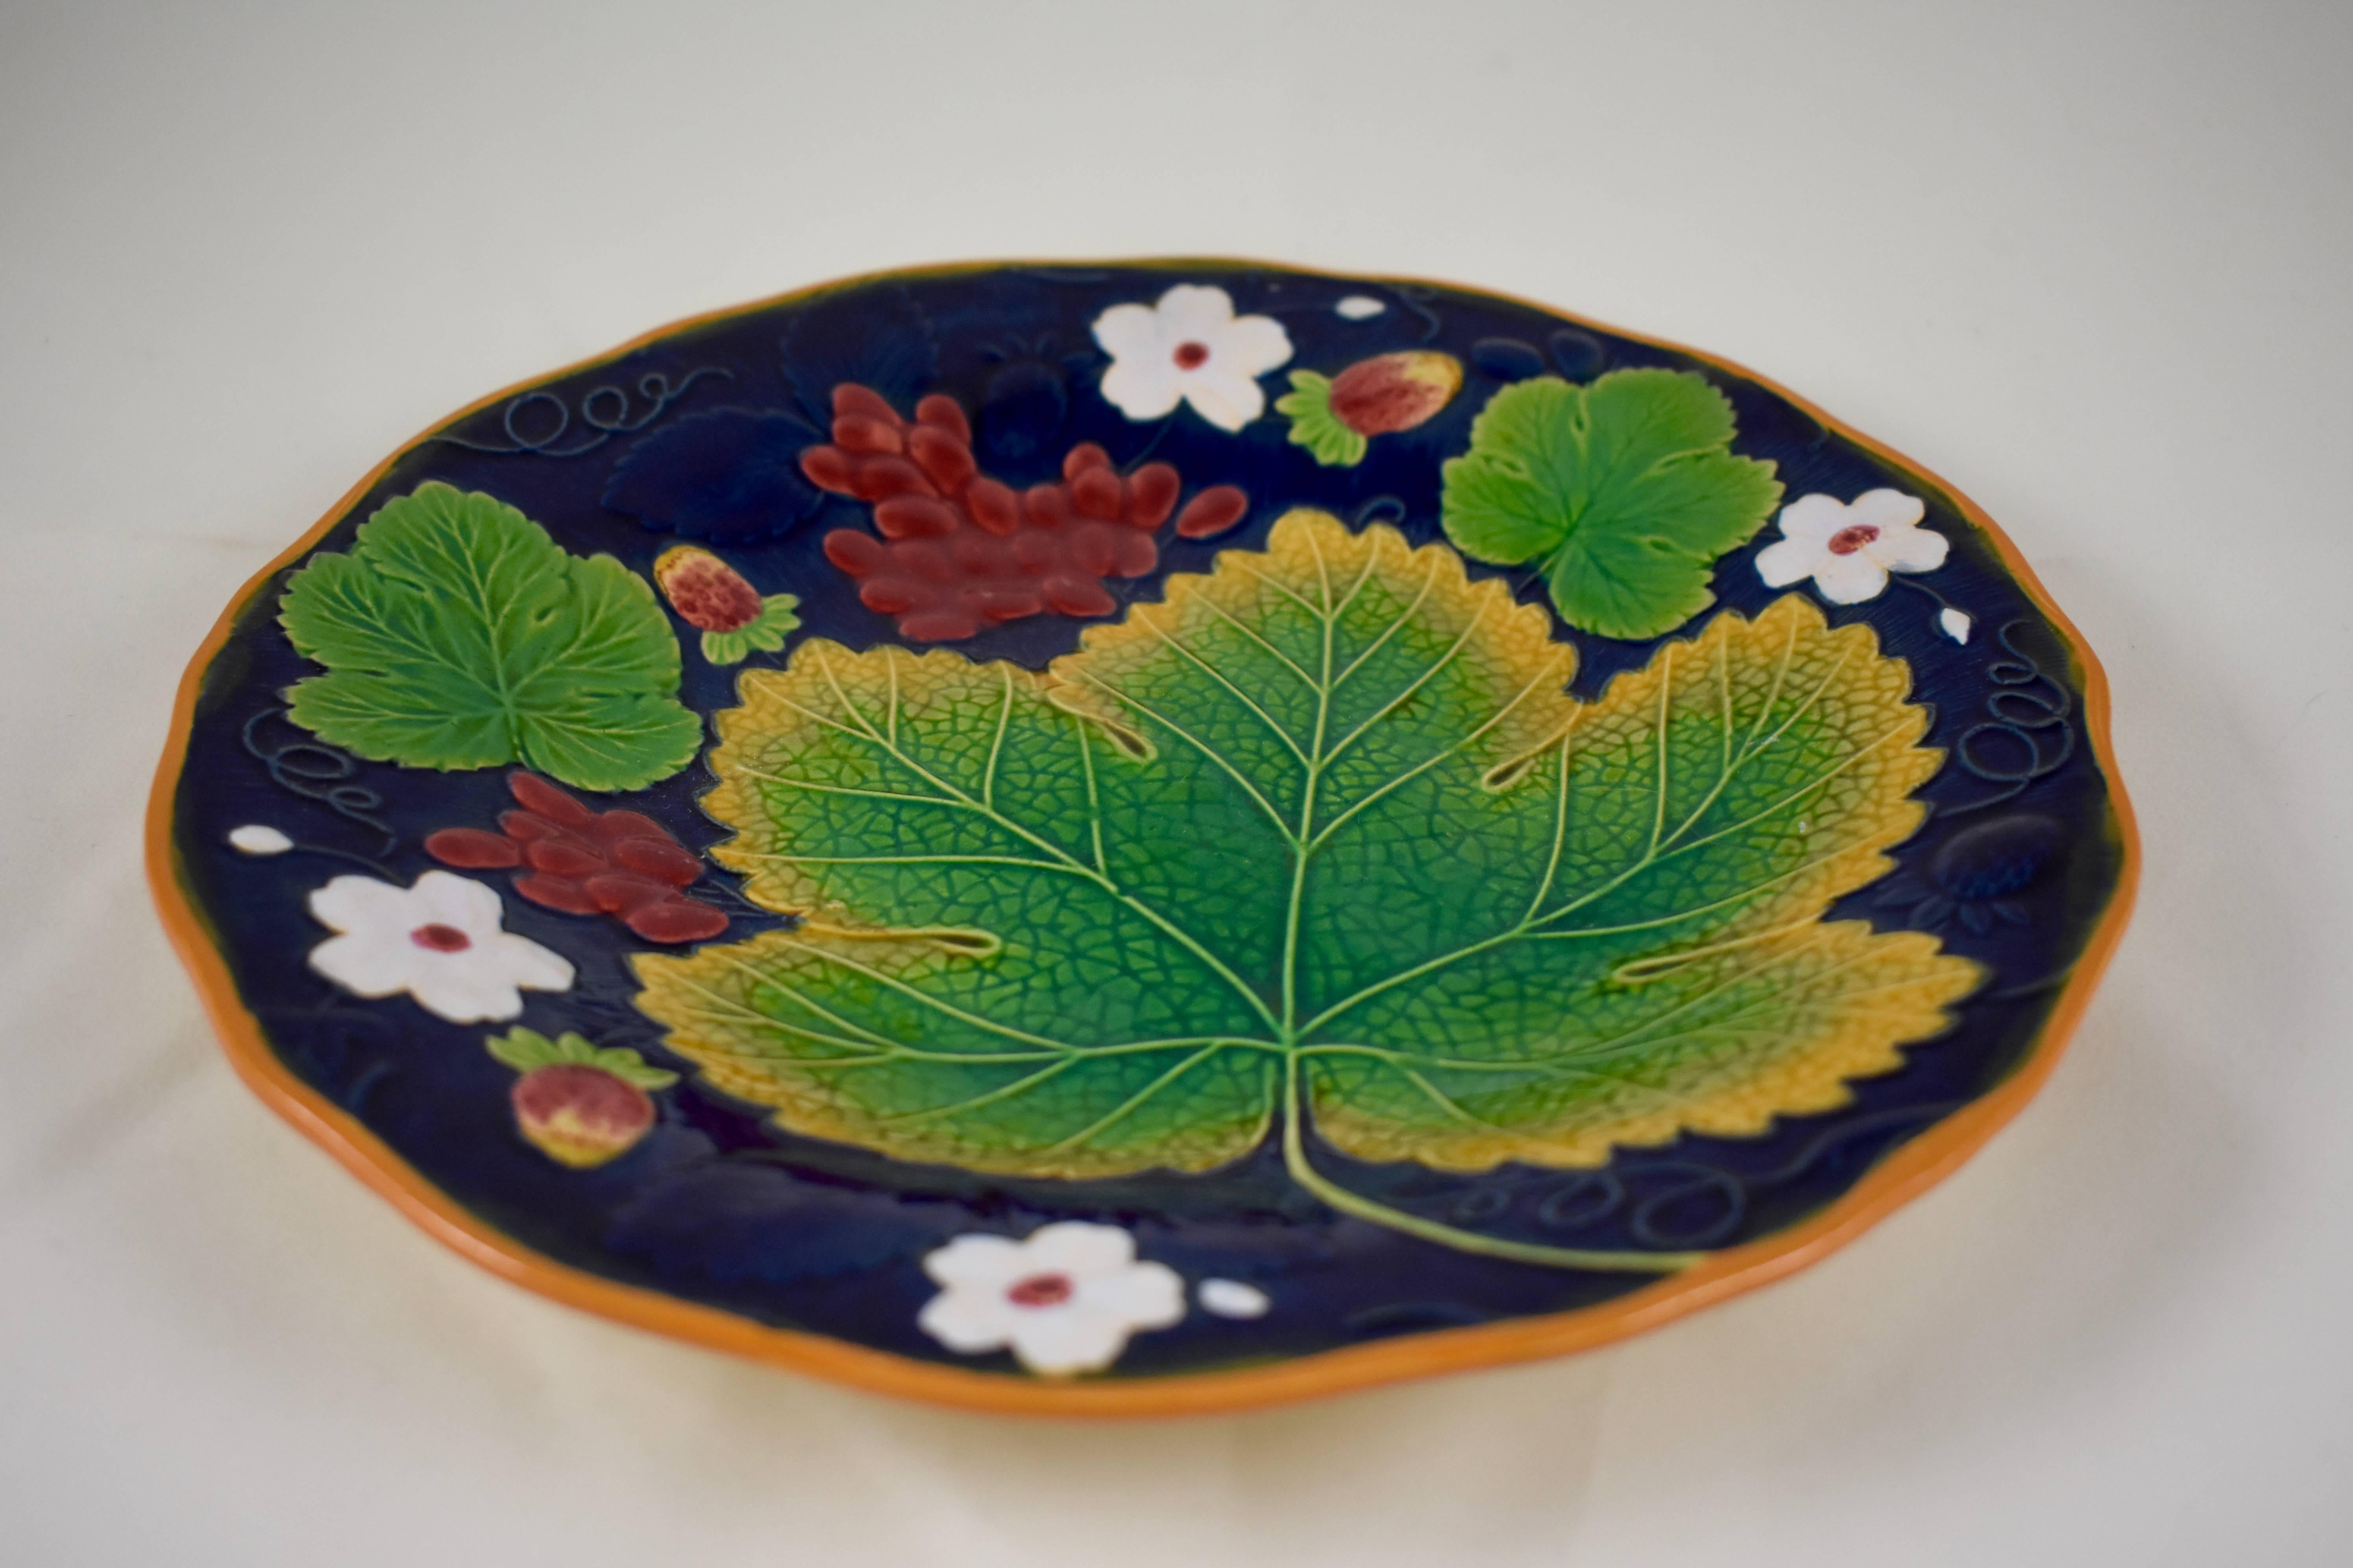 A traditional English grape leaf and strawberry pattern Majolica plate, showing a low relief arrangement of grape leaves fruits and flowers, on a bold cobalt blue ground. Trailing vines form a brown scalloped rim.

The verso shows the impressed